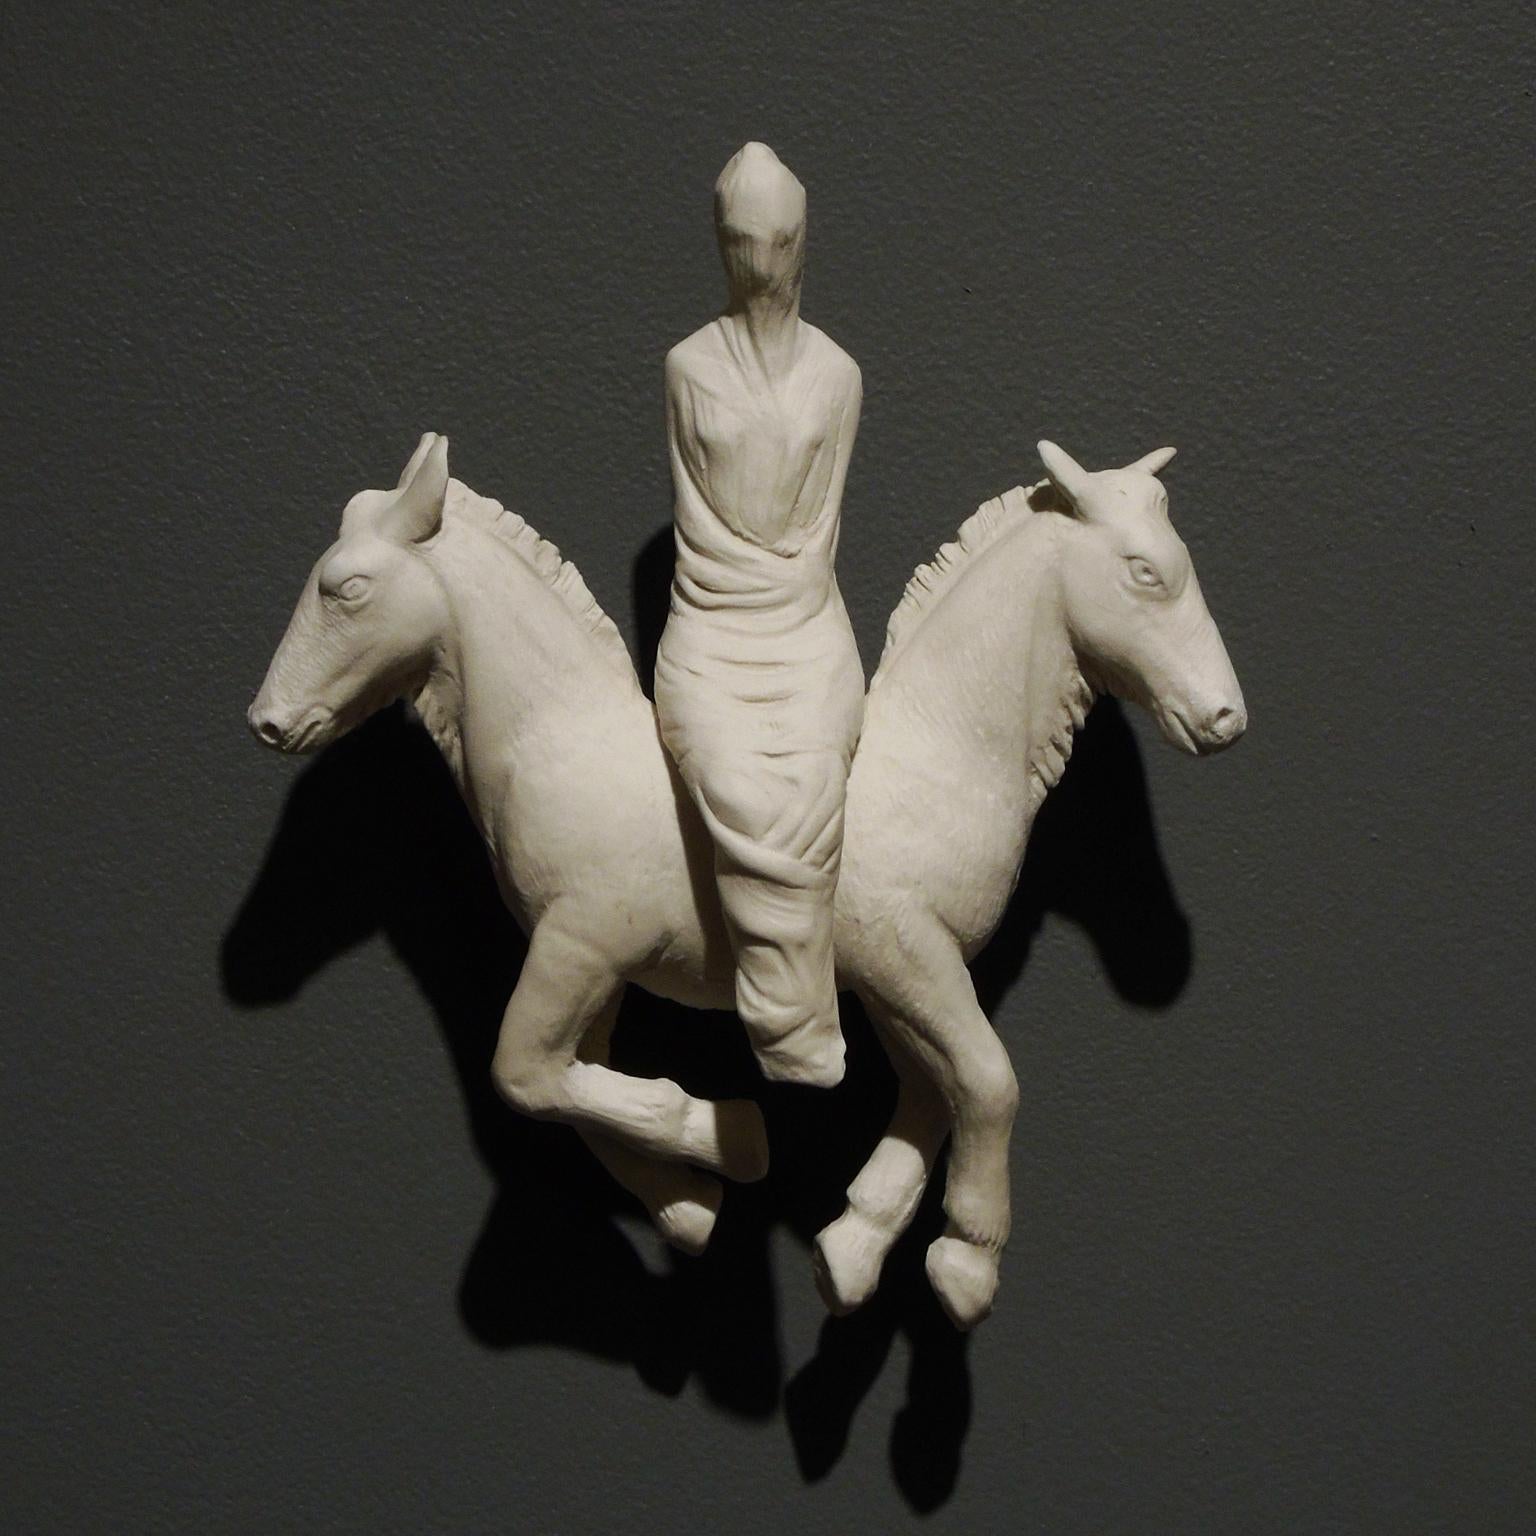 "Shroud" a white porcelain sculpture by Robin Whitman, features a wrapped female figure seated on the back of a two headed donkey, The two donkey heads are at the opposite ends of the beast. Whiteman's work employs human and animal imagery to